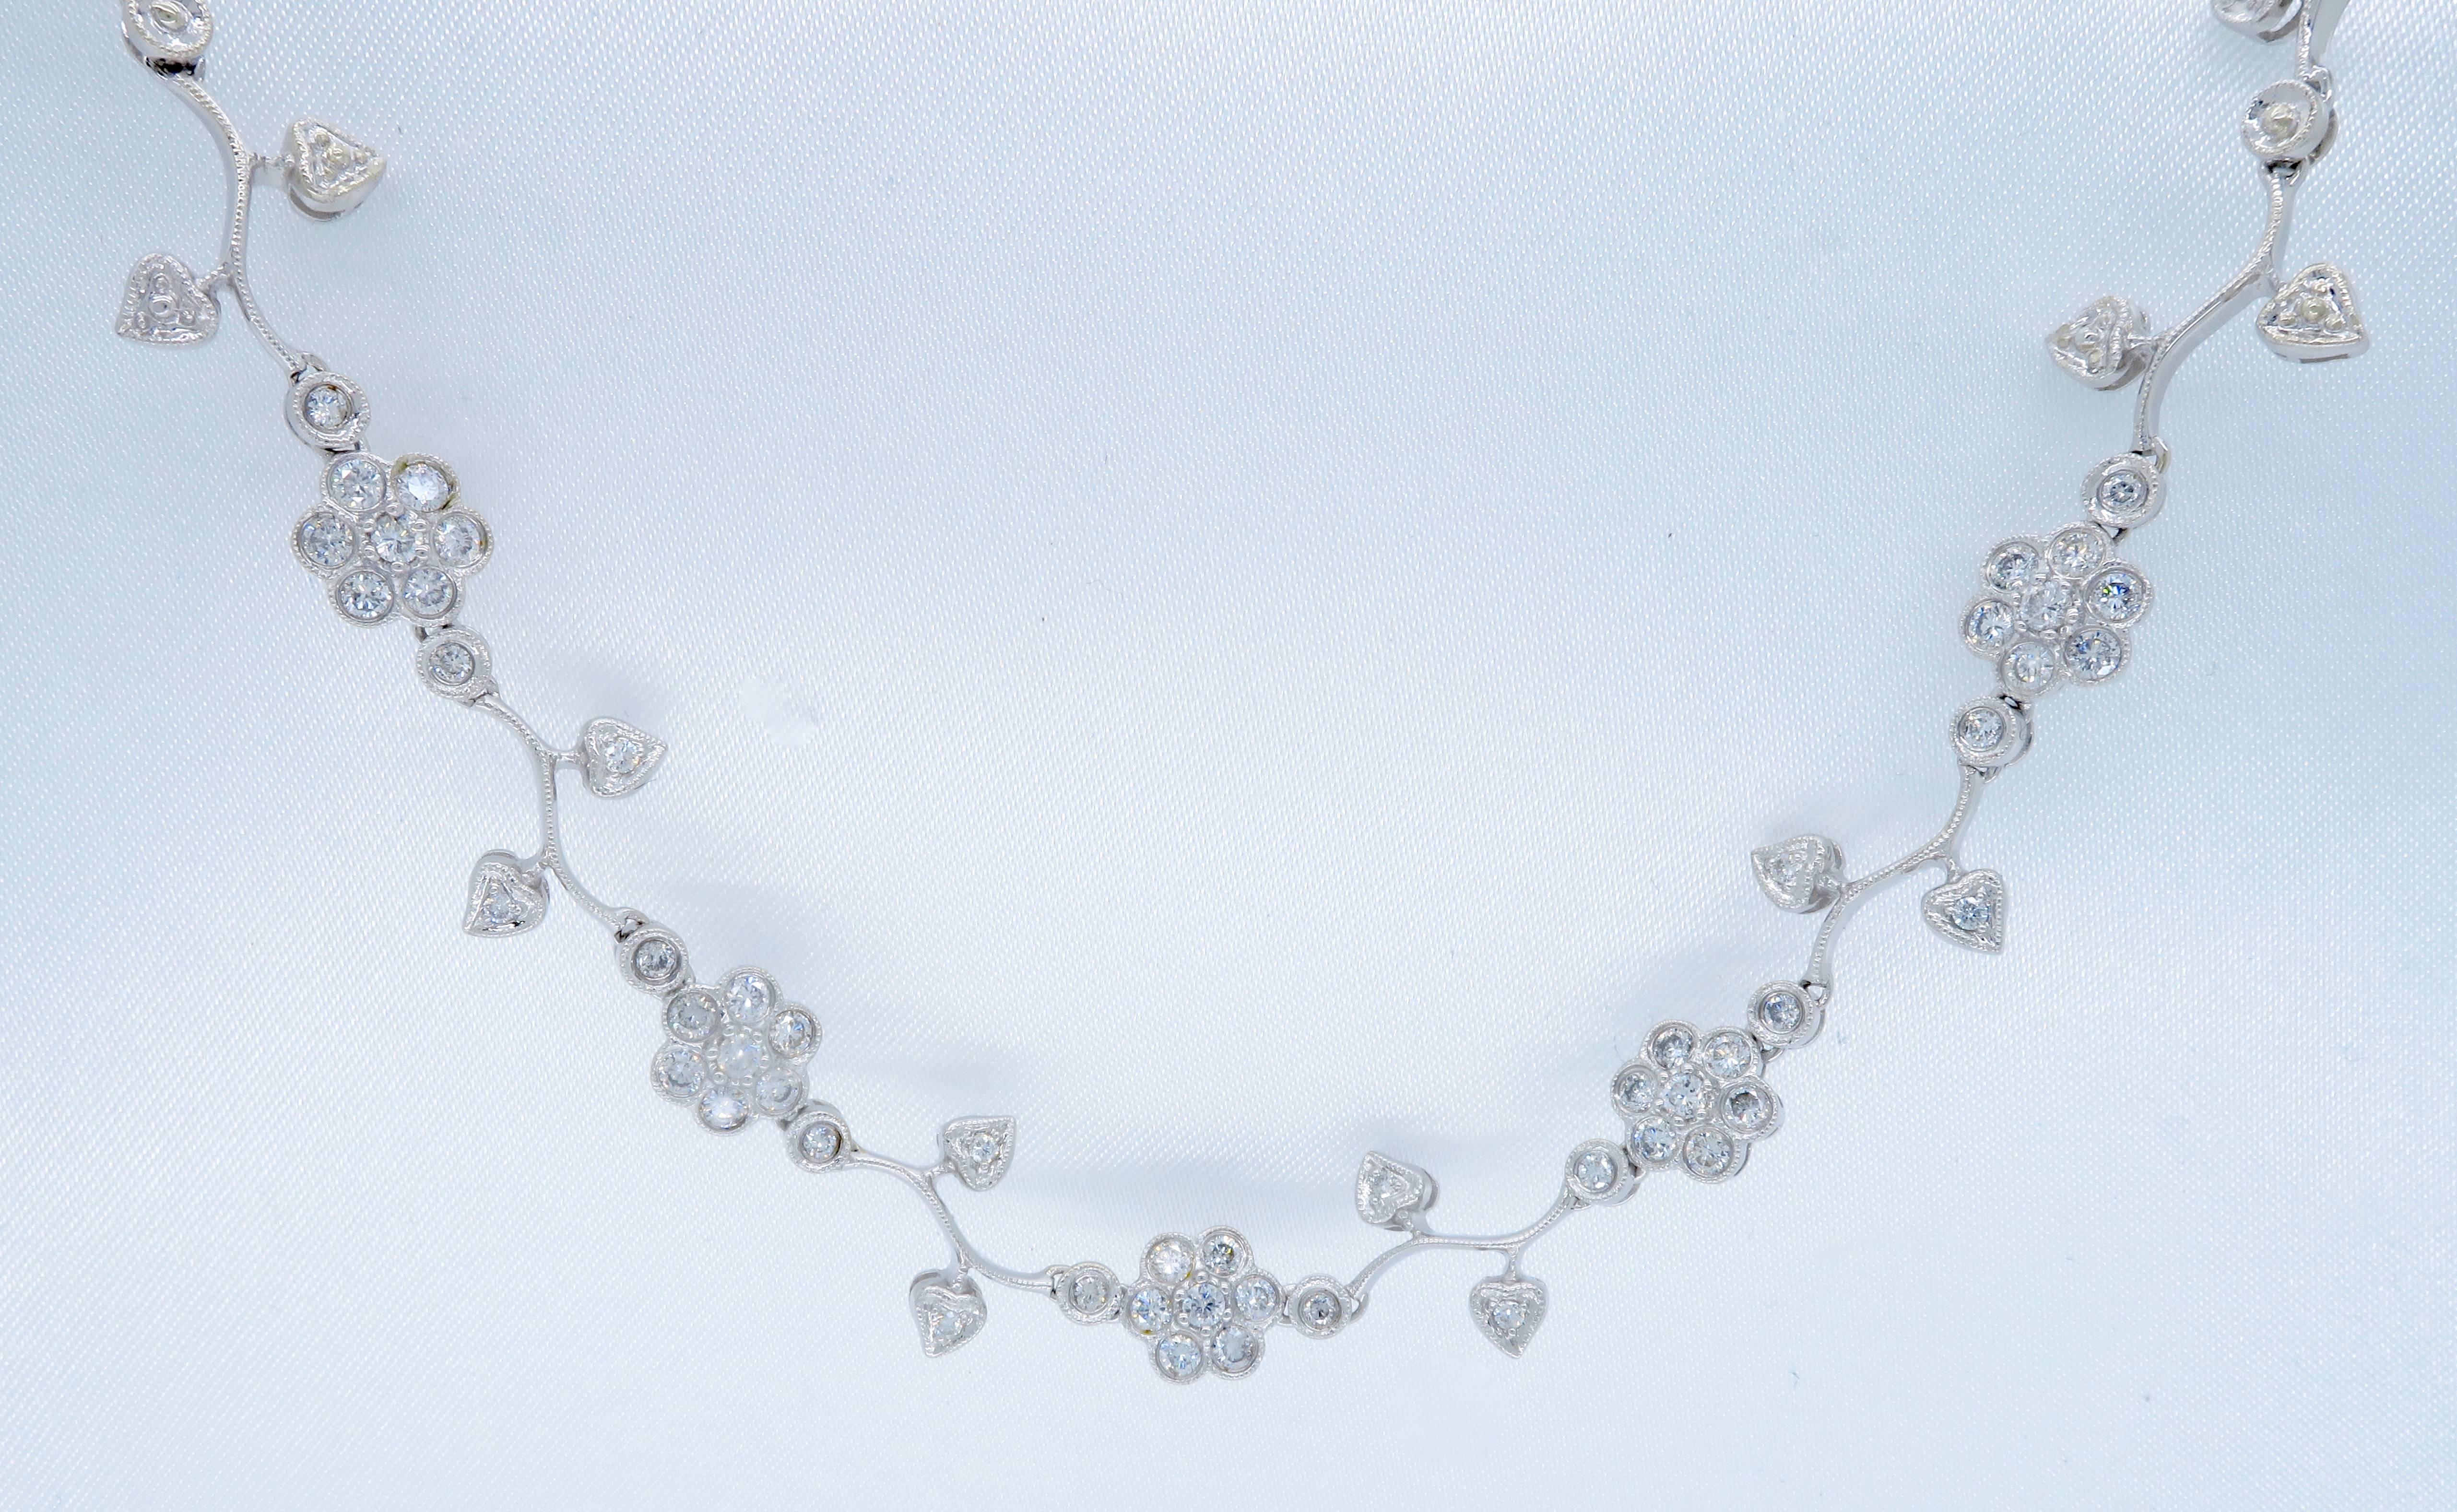 This necklace features 53 Round Brilliant Cut Diamonds displayed in an elegant floral pattern. There is approximately 1.35CTW of diamonds in this necklace. The diamonds display an average color of G-I and average clarity of SI1-I1. The 14k white